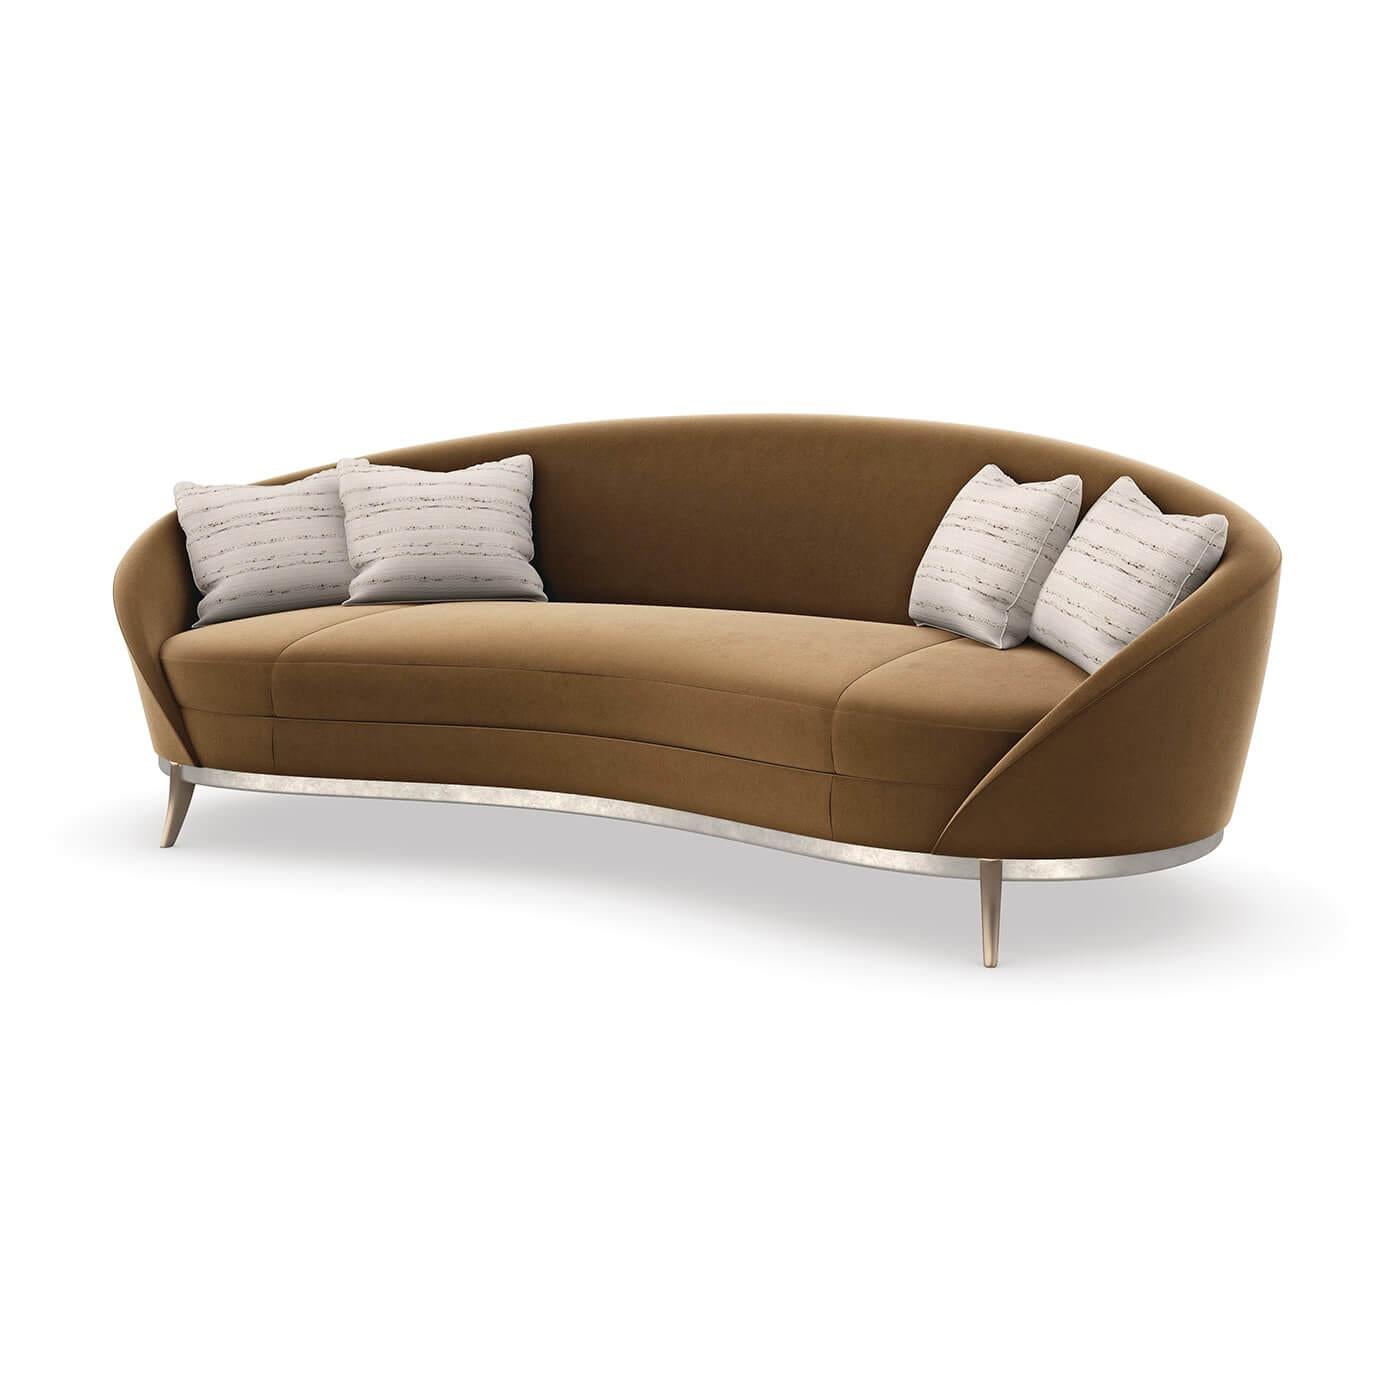 An Elegant Art Deco Kidney Sofa. With an iconic kidney shape, this sumptuous sofa offers enveloping comfort in a warm caramel-colored velvet.

Its gracefully flowing form features a smooth back and bowed bench seat, with French seams for a